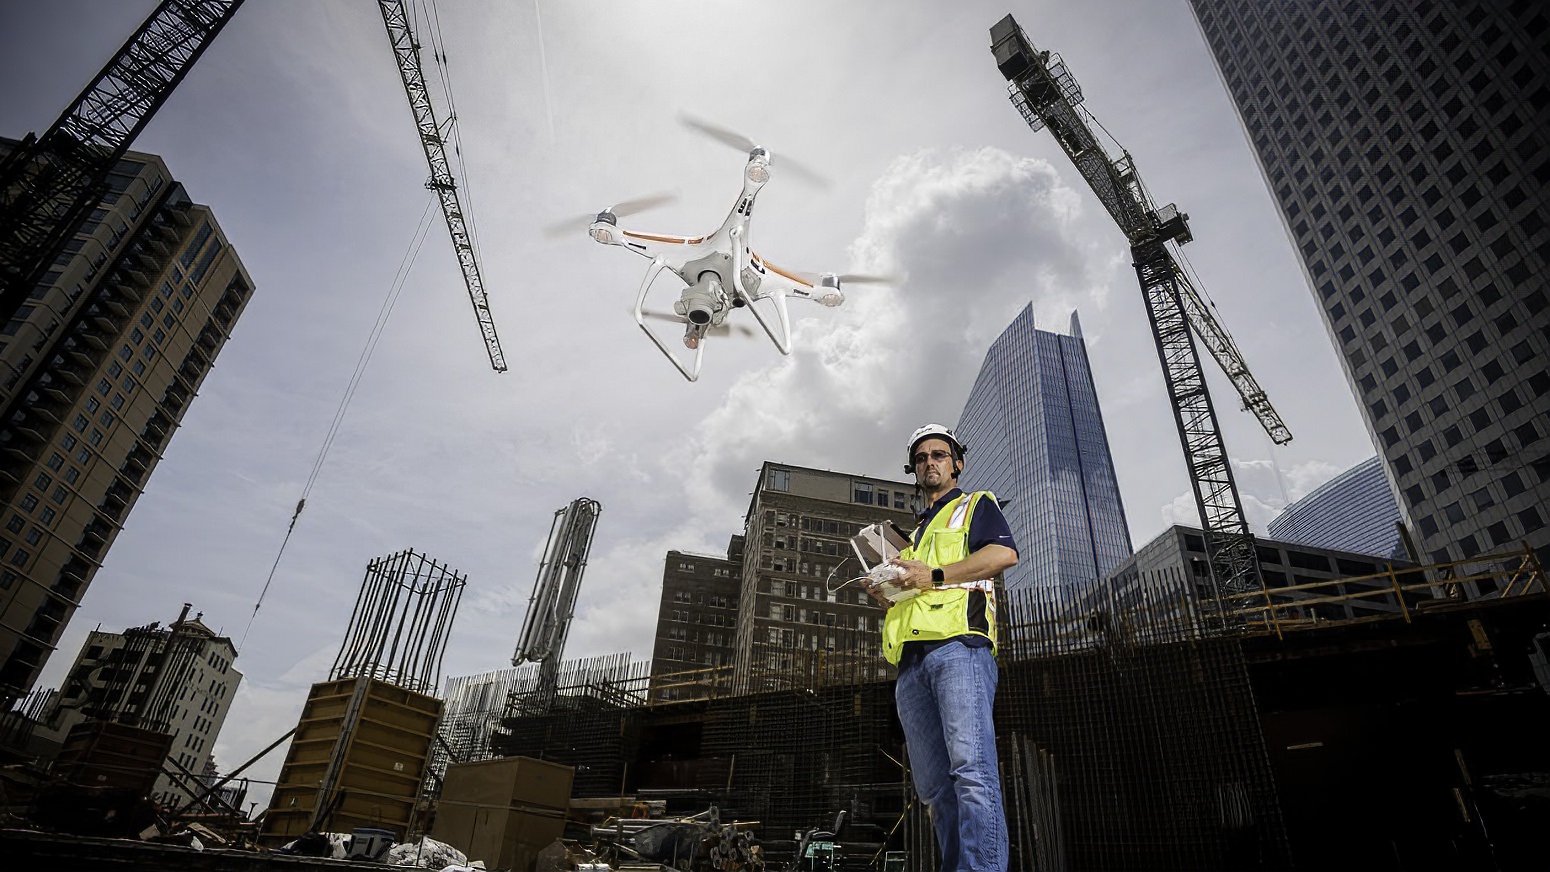 Commercial-property-joins-tech-revolution-with-drones-2-copy-sharpen-sharpen.jpg